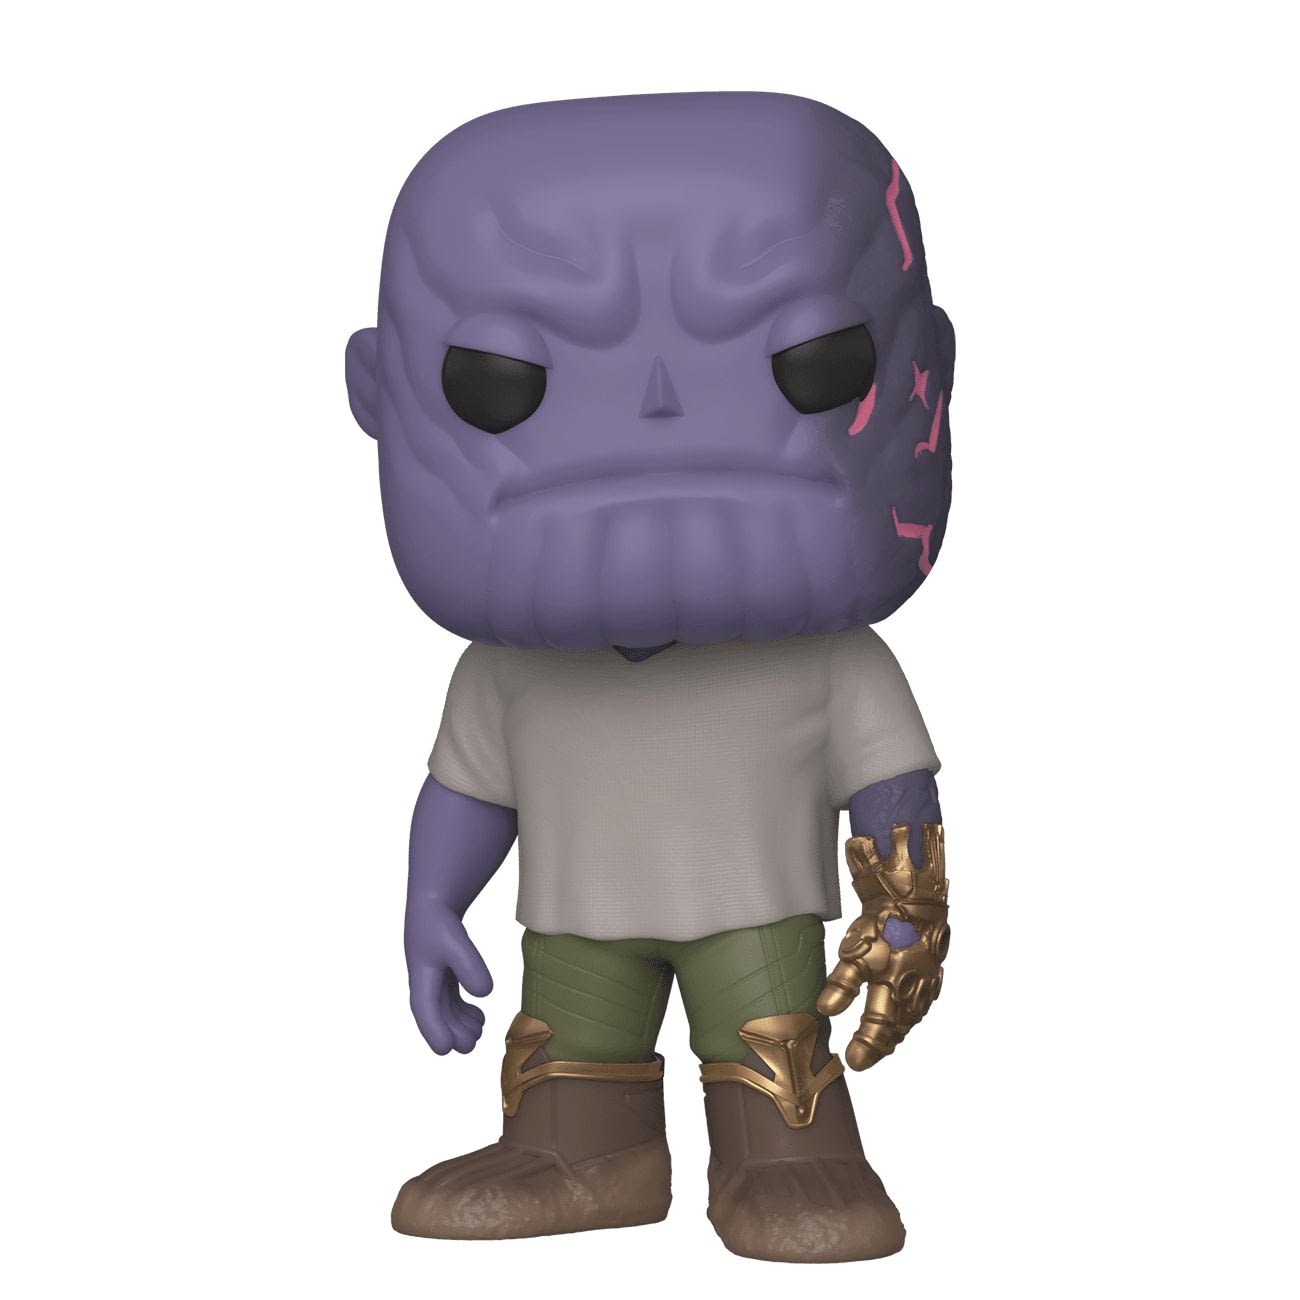 New Wave of “Avengers: Endgame” Funko Pop Figures Incoming 